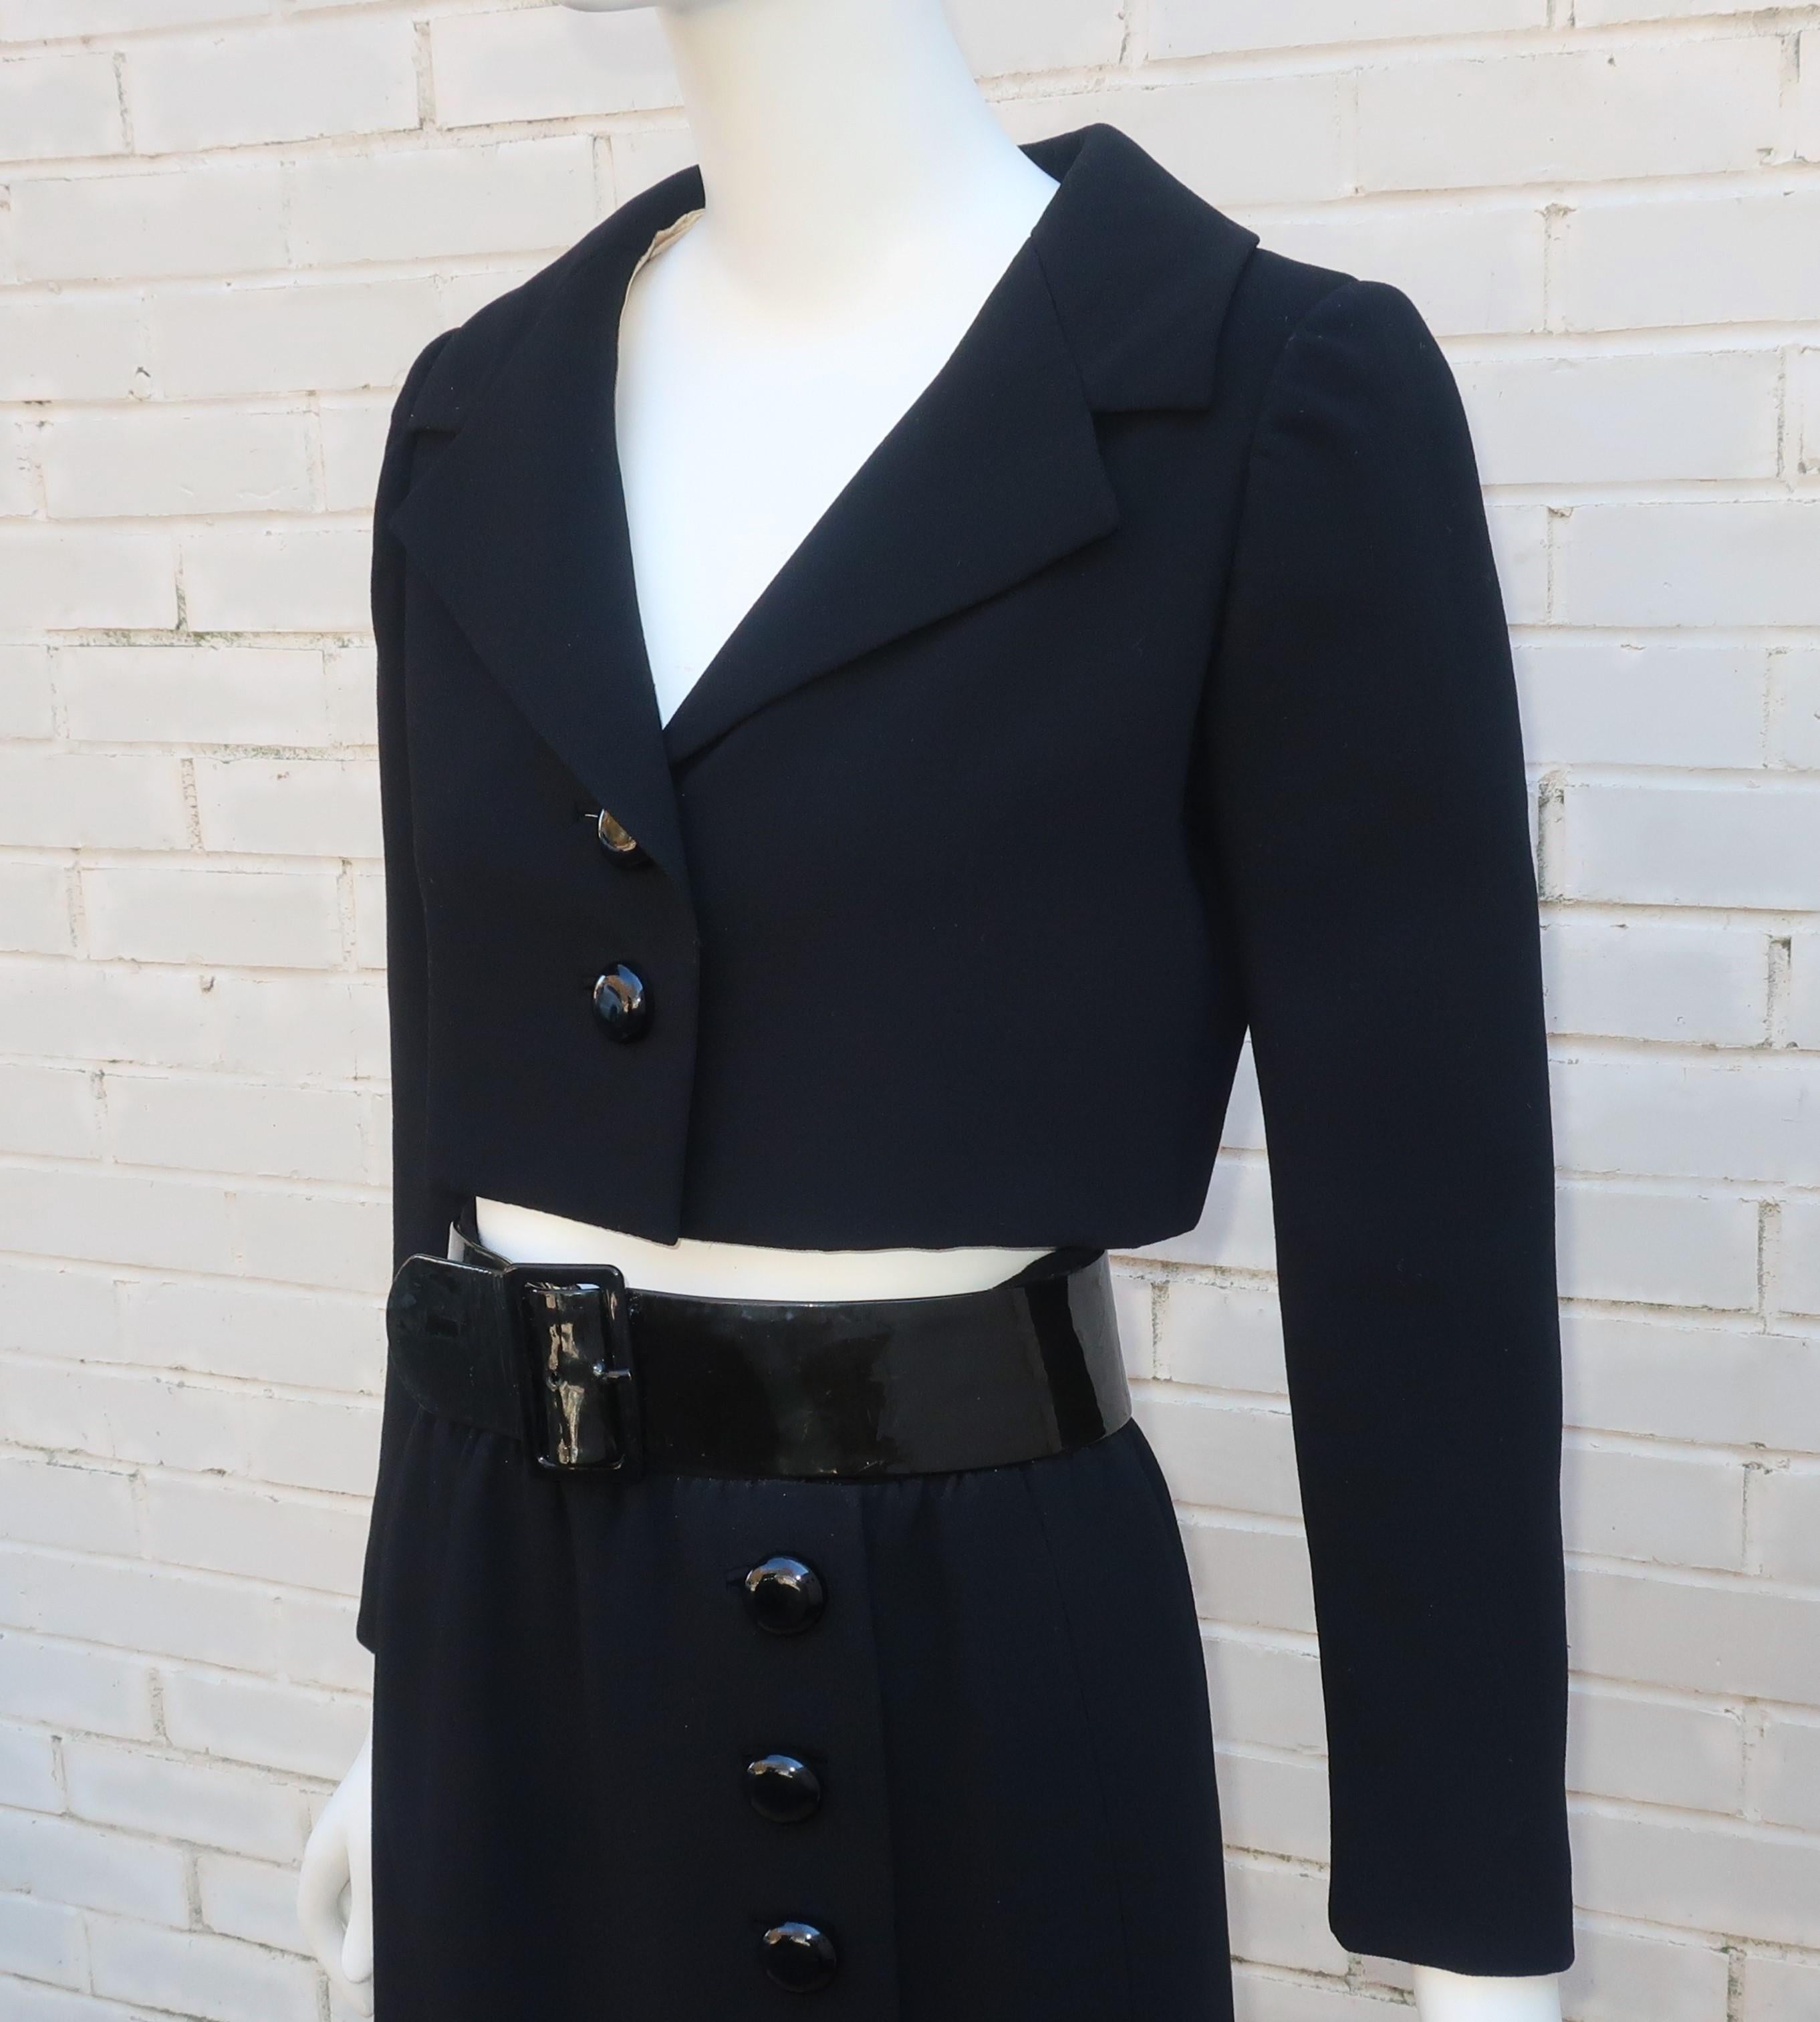 Women's Norman Norell Belted Maxi Skirt Evening Suit With Cropped Jacket, 1968 For Sale